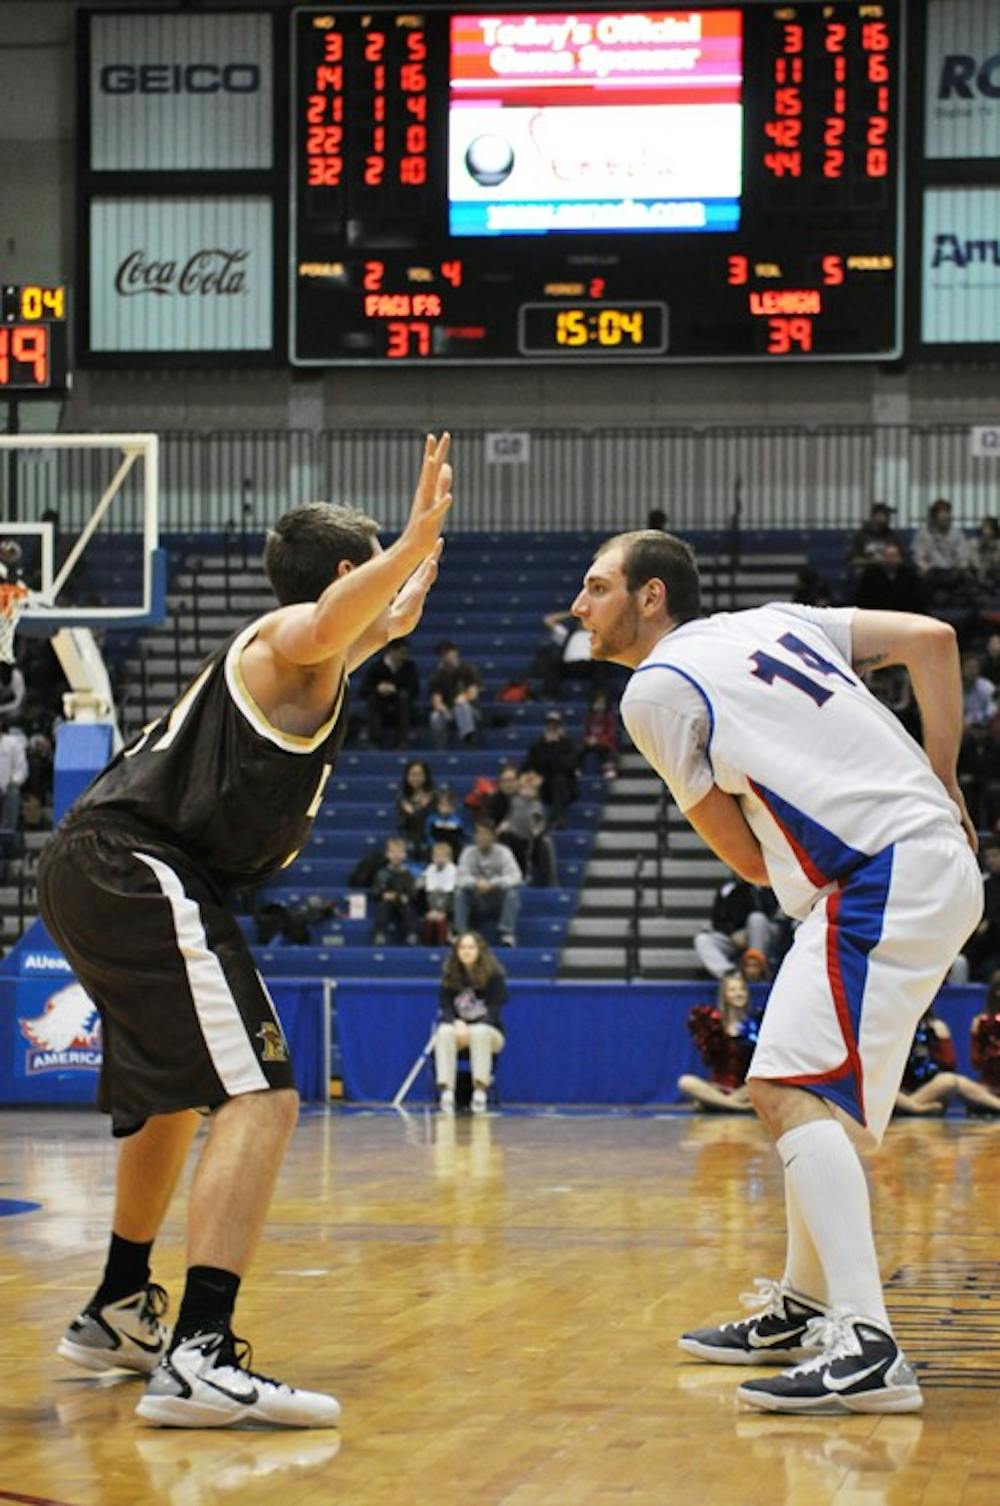 SIZING UP â€” Senior forward Vlad Moldoveanu looks for an open pass against a Lehigh opponent. Moldoveanu scored a career-high 39 points in the Eagles\' 82-75 victory on Saturday in Bender Arena. 